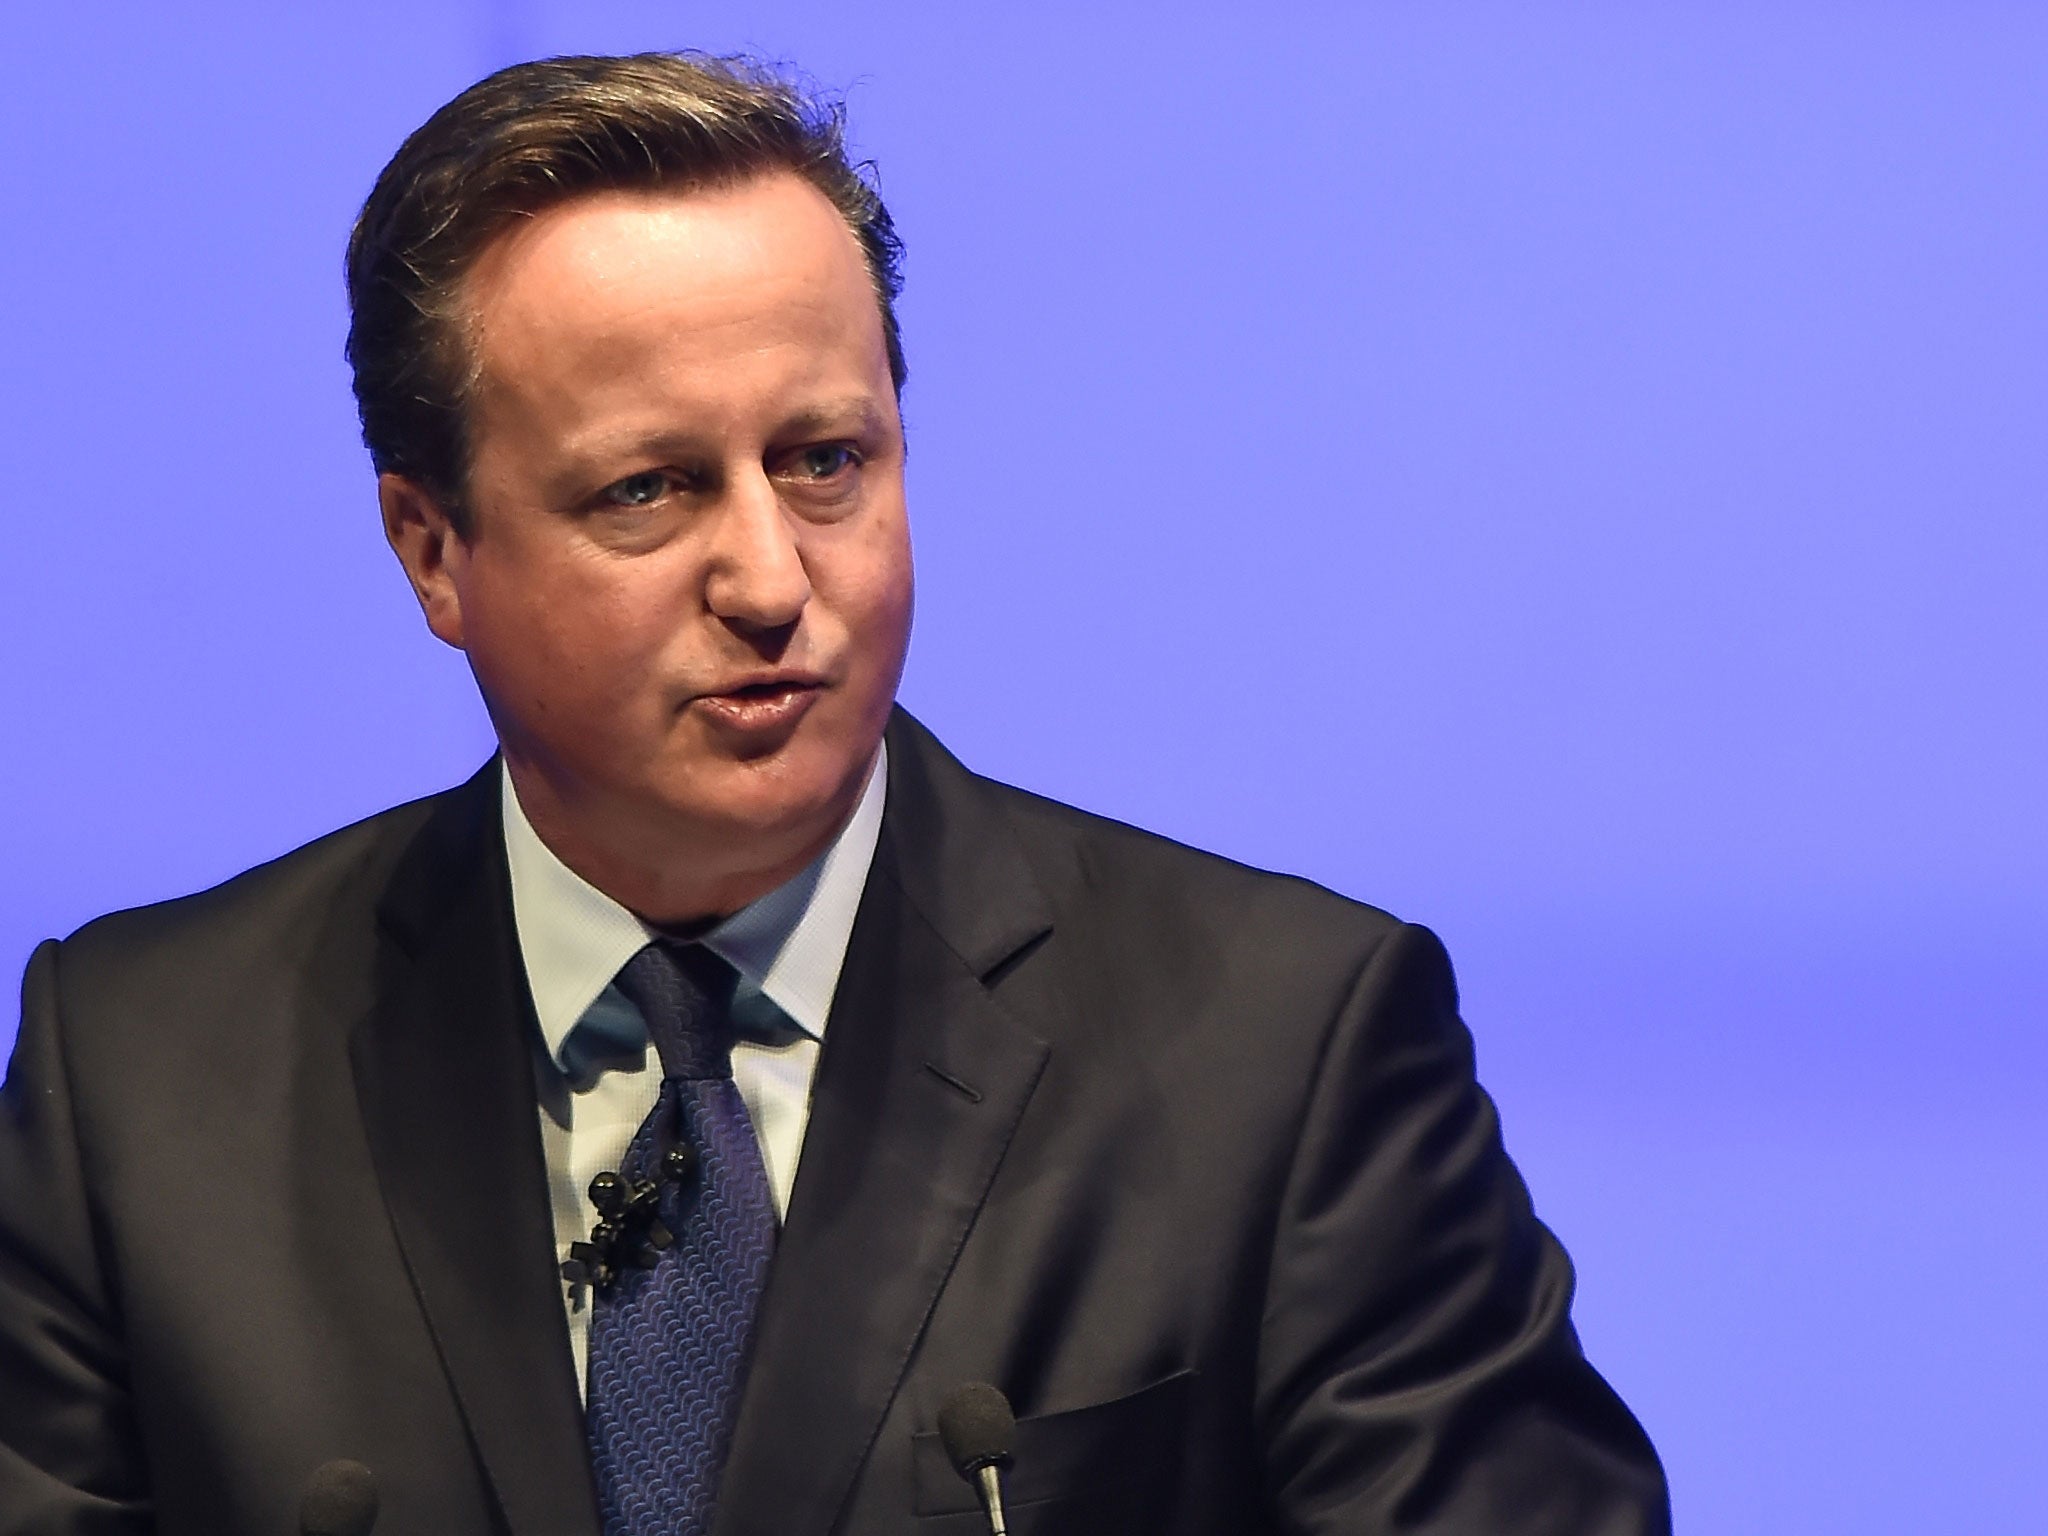 Labour said David Cameron’s role negotiating with China on behalf of the UK proved Acoba needed reforming